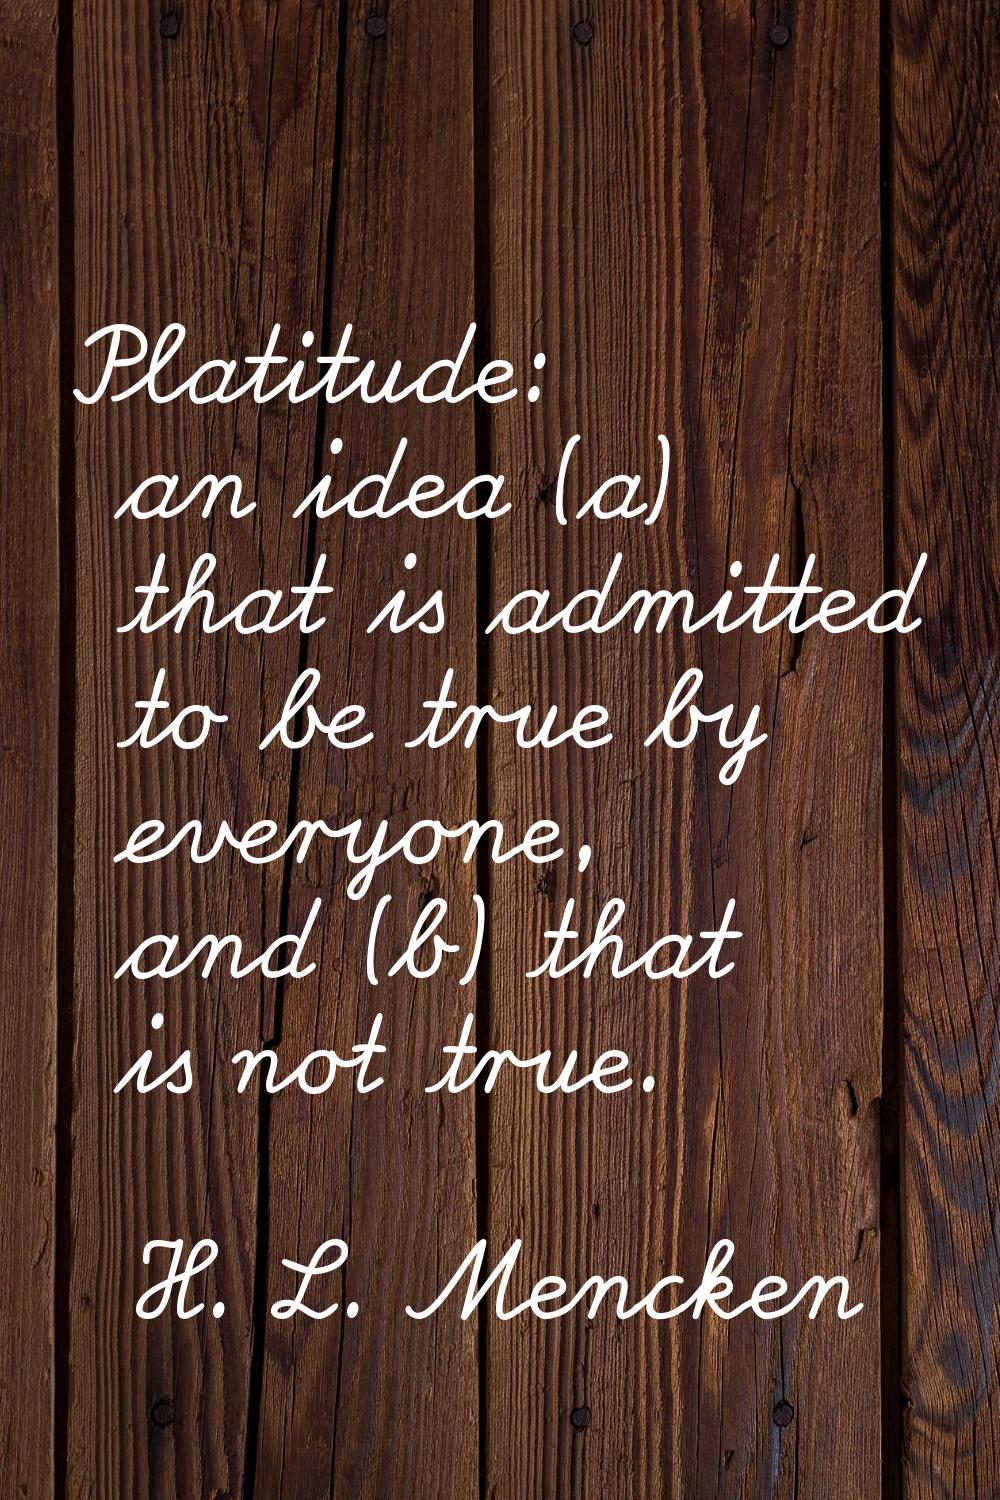 Platitude: an idea (a) that is admitted to be true by everyone, and (b) that is not true.